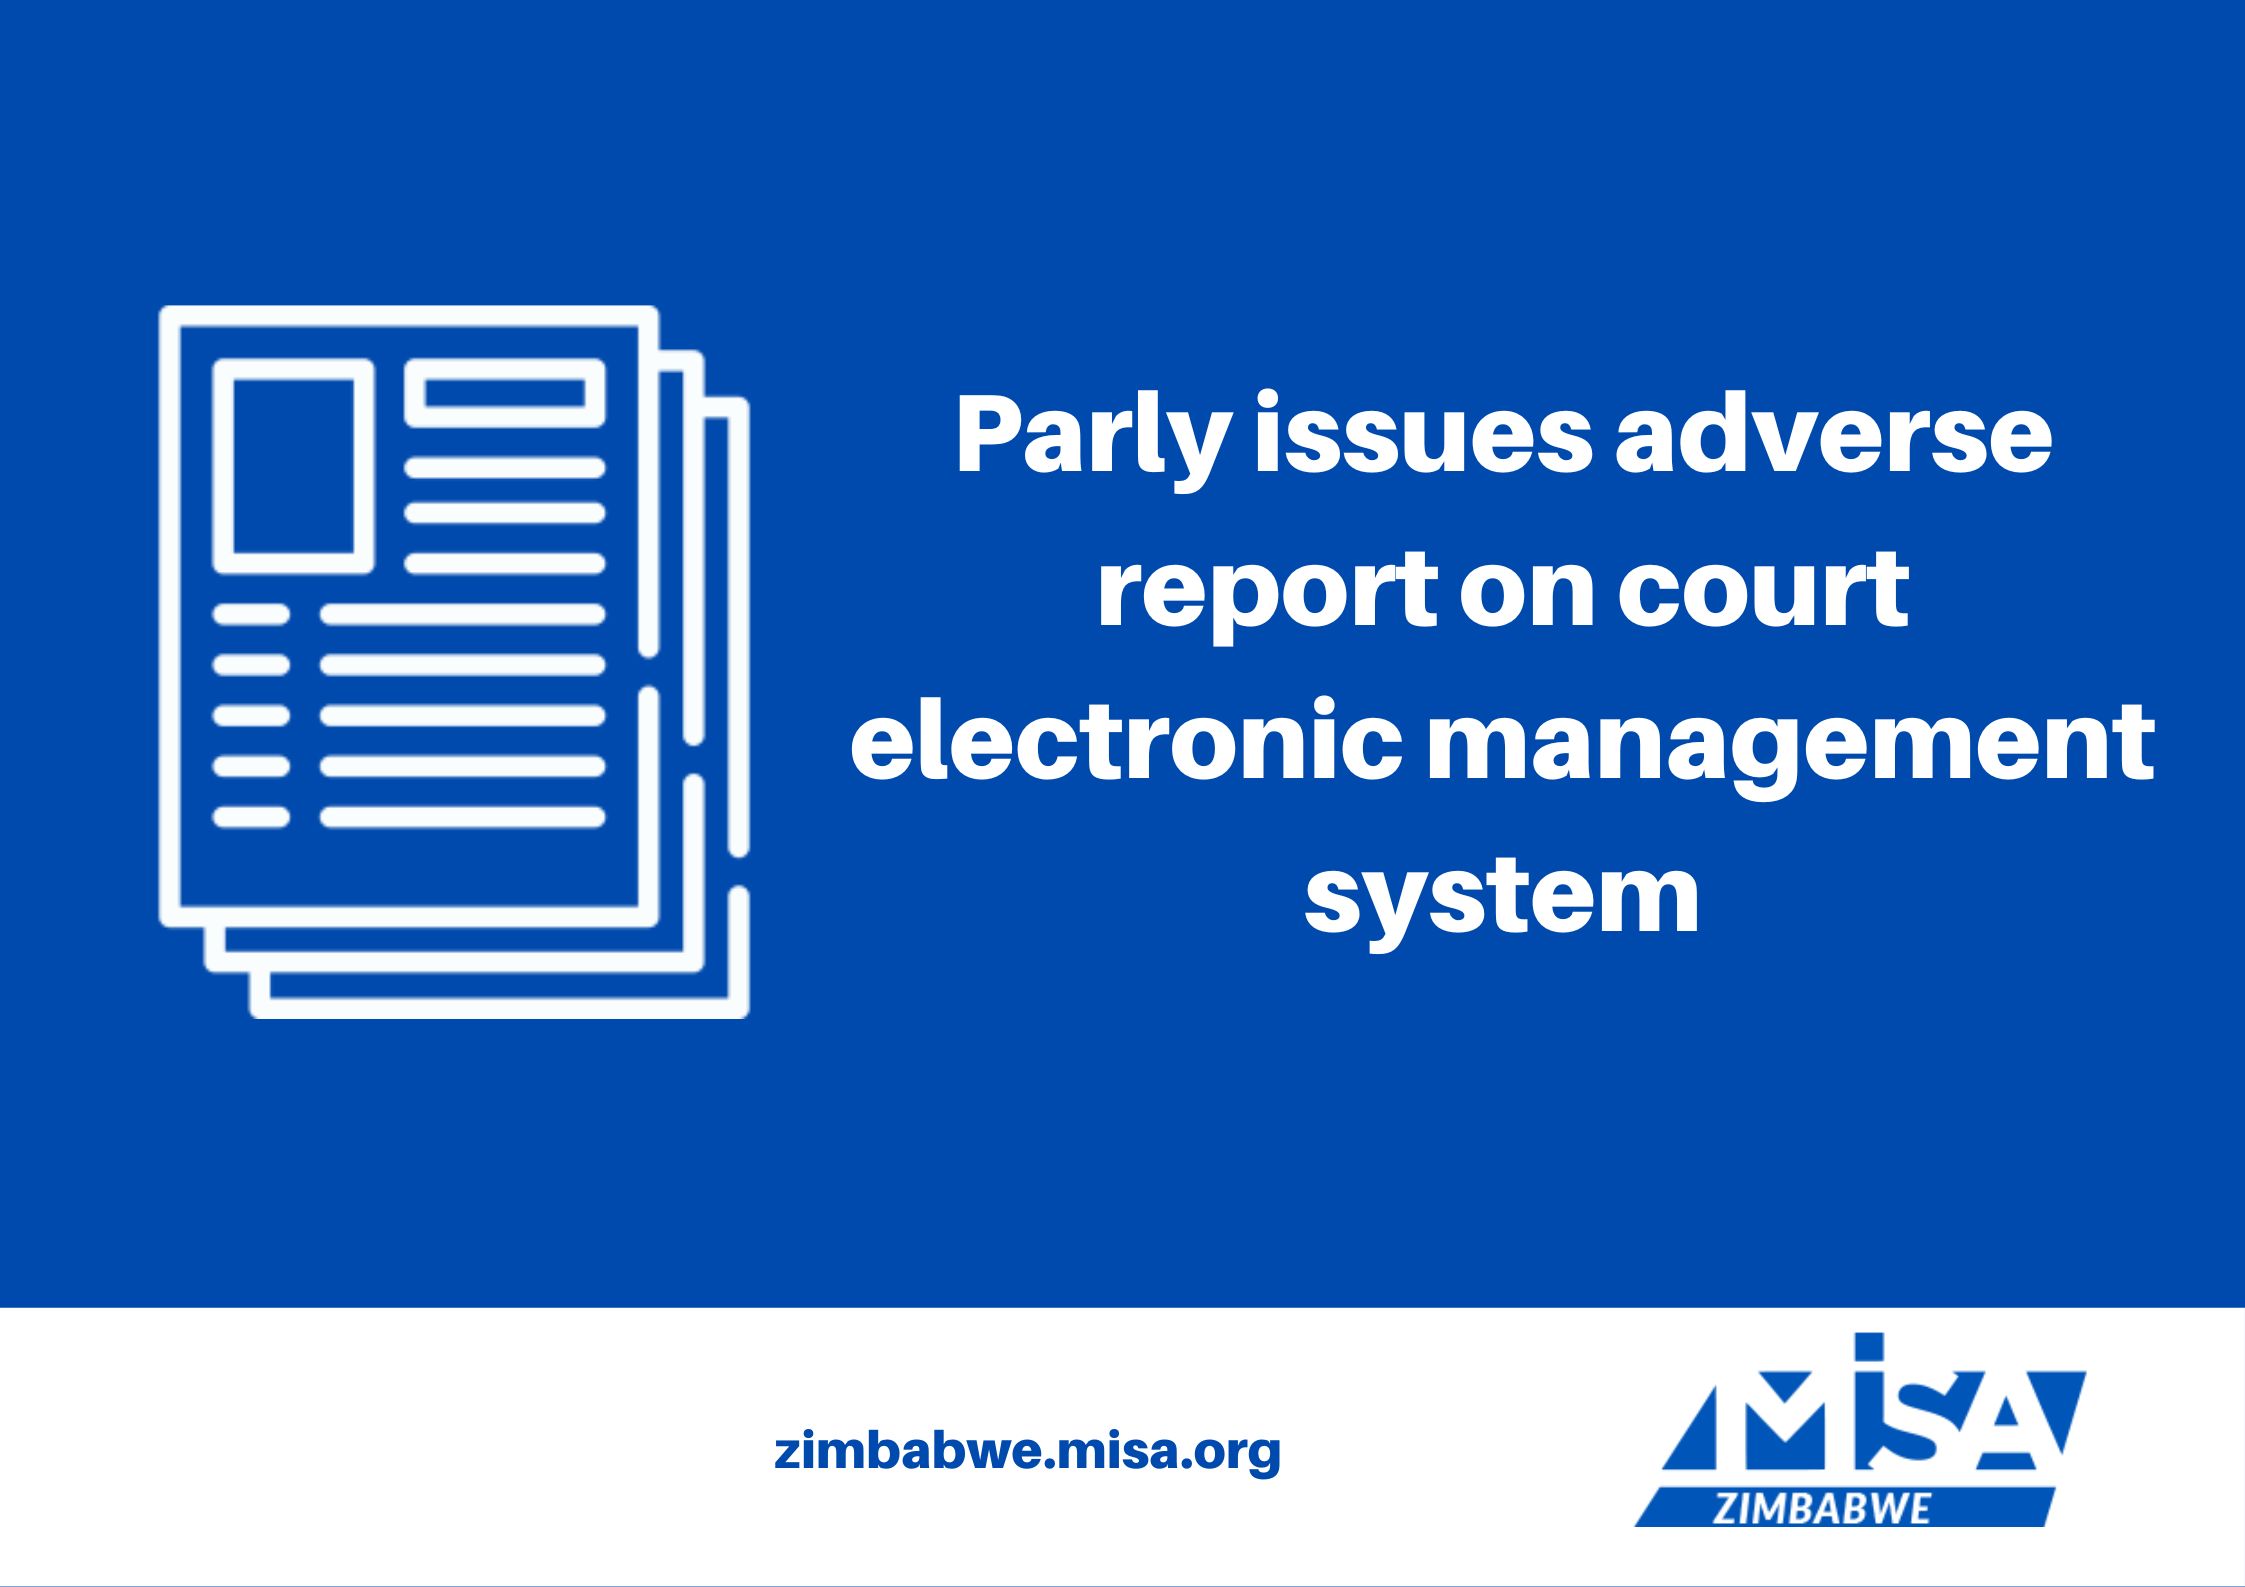 Parly issues adverse report on court electronic management system